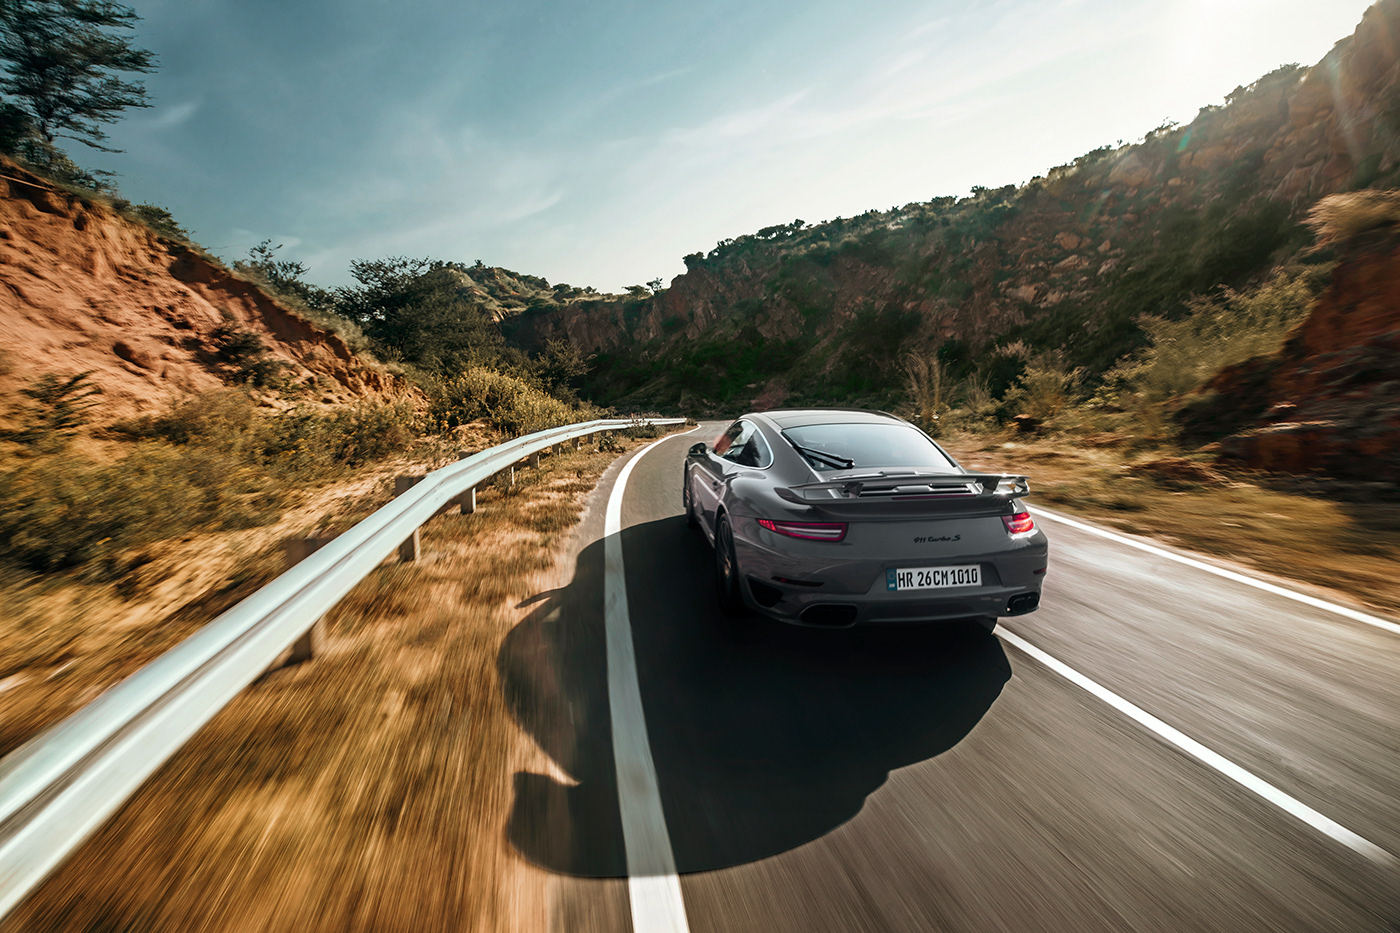 Porsche 911 in the mountains and aravali hills
